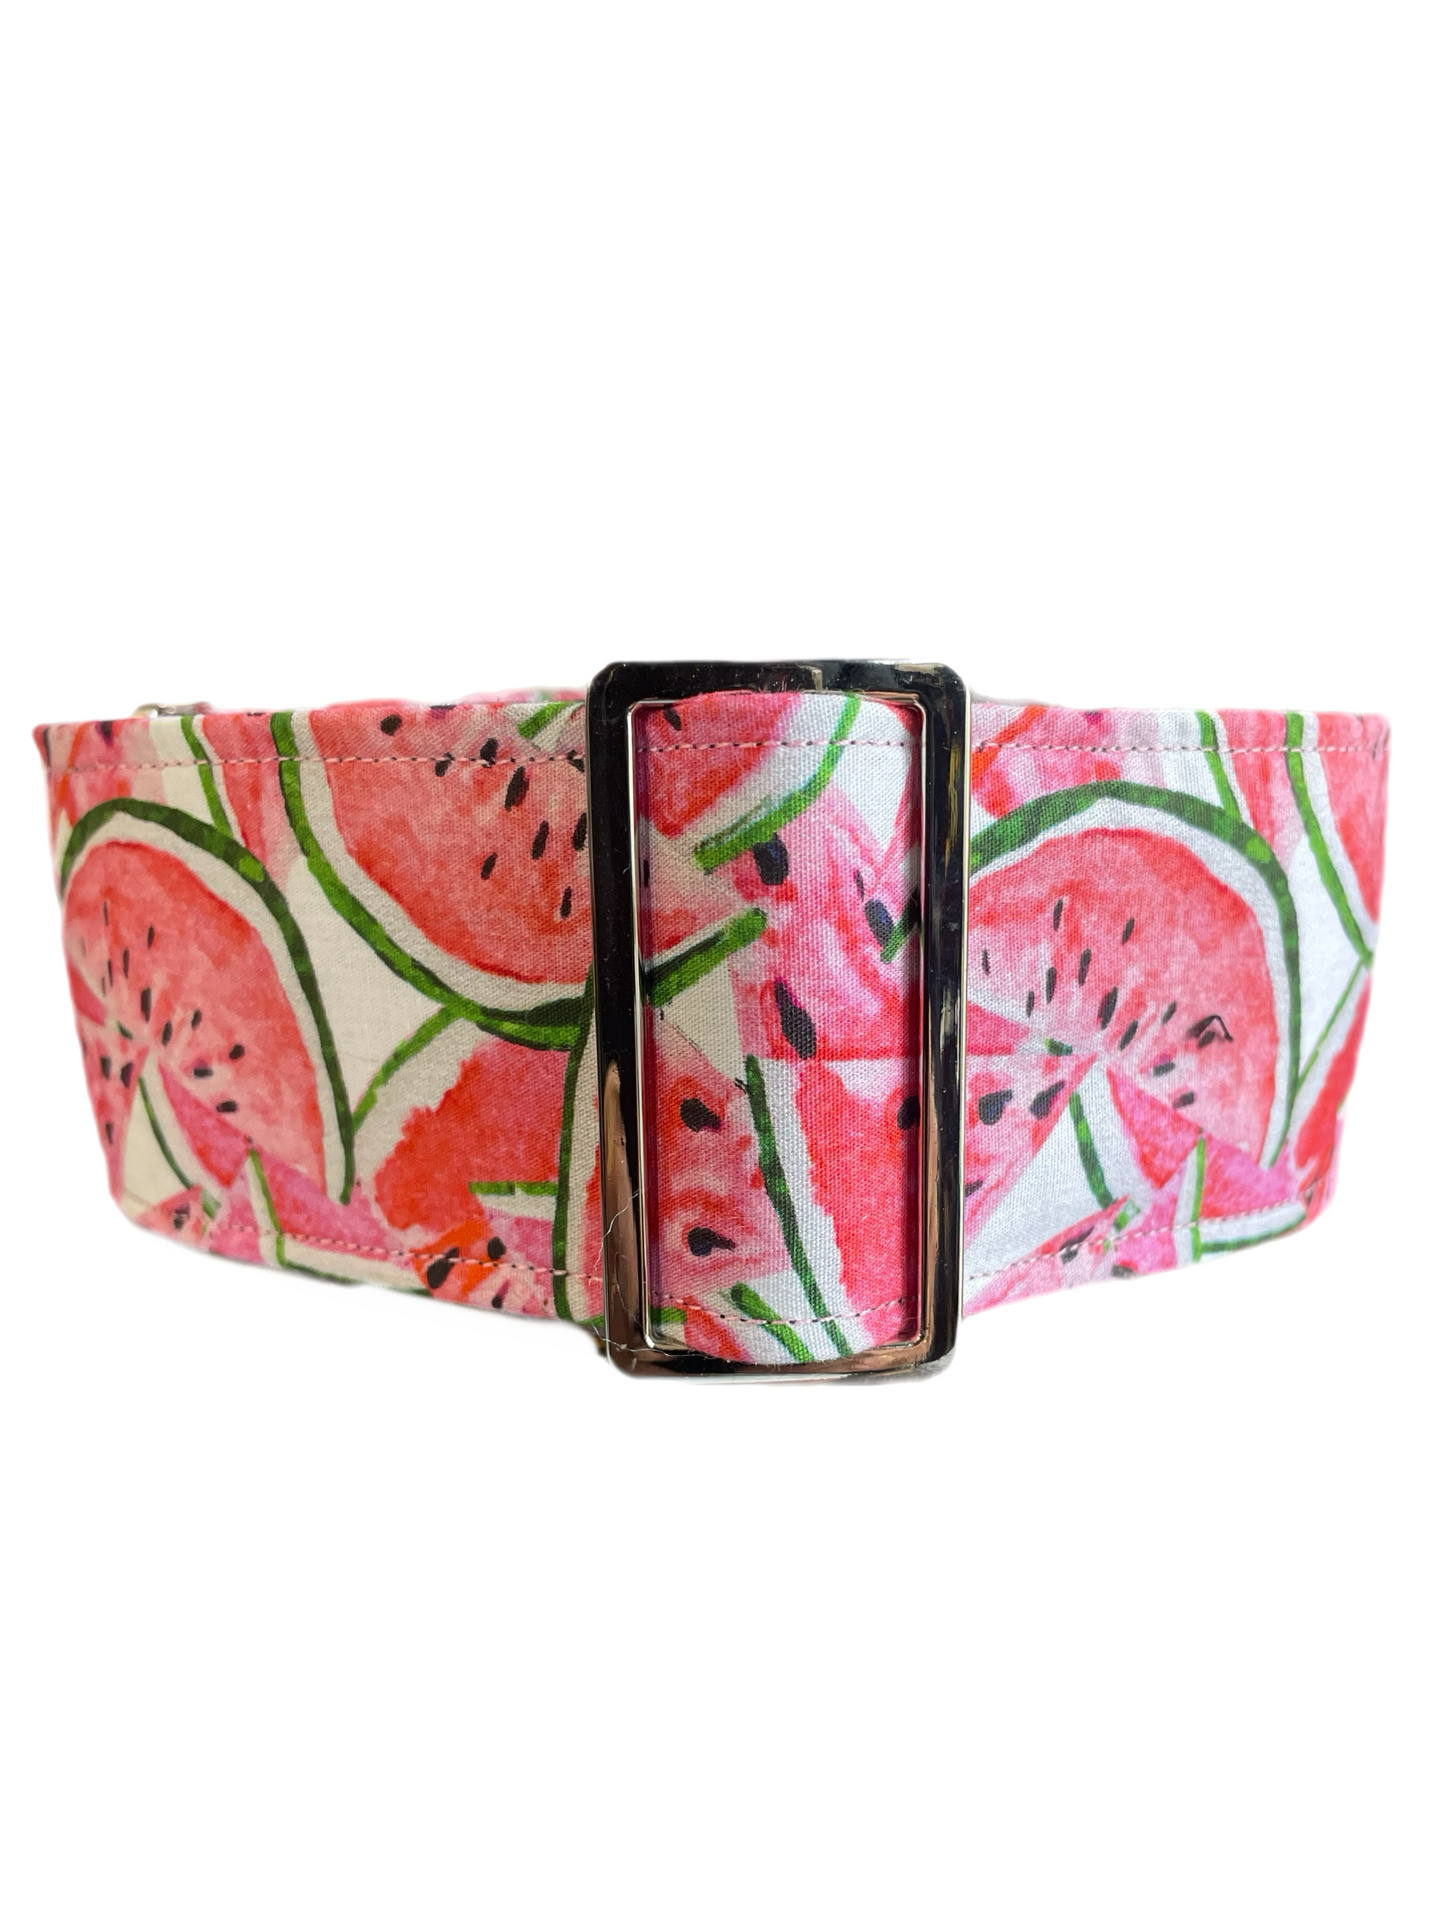 Watermelon in soft tones  greyhound Martingale collar cotton covered 50mm width super soft